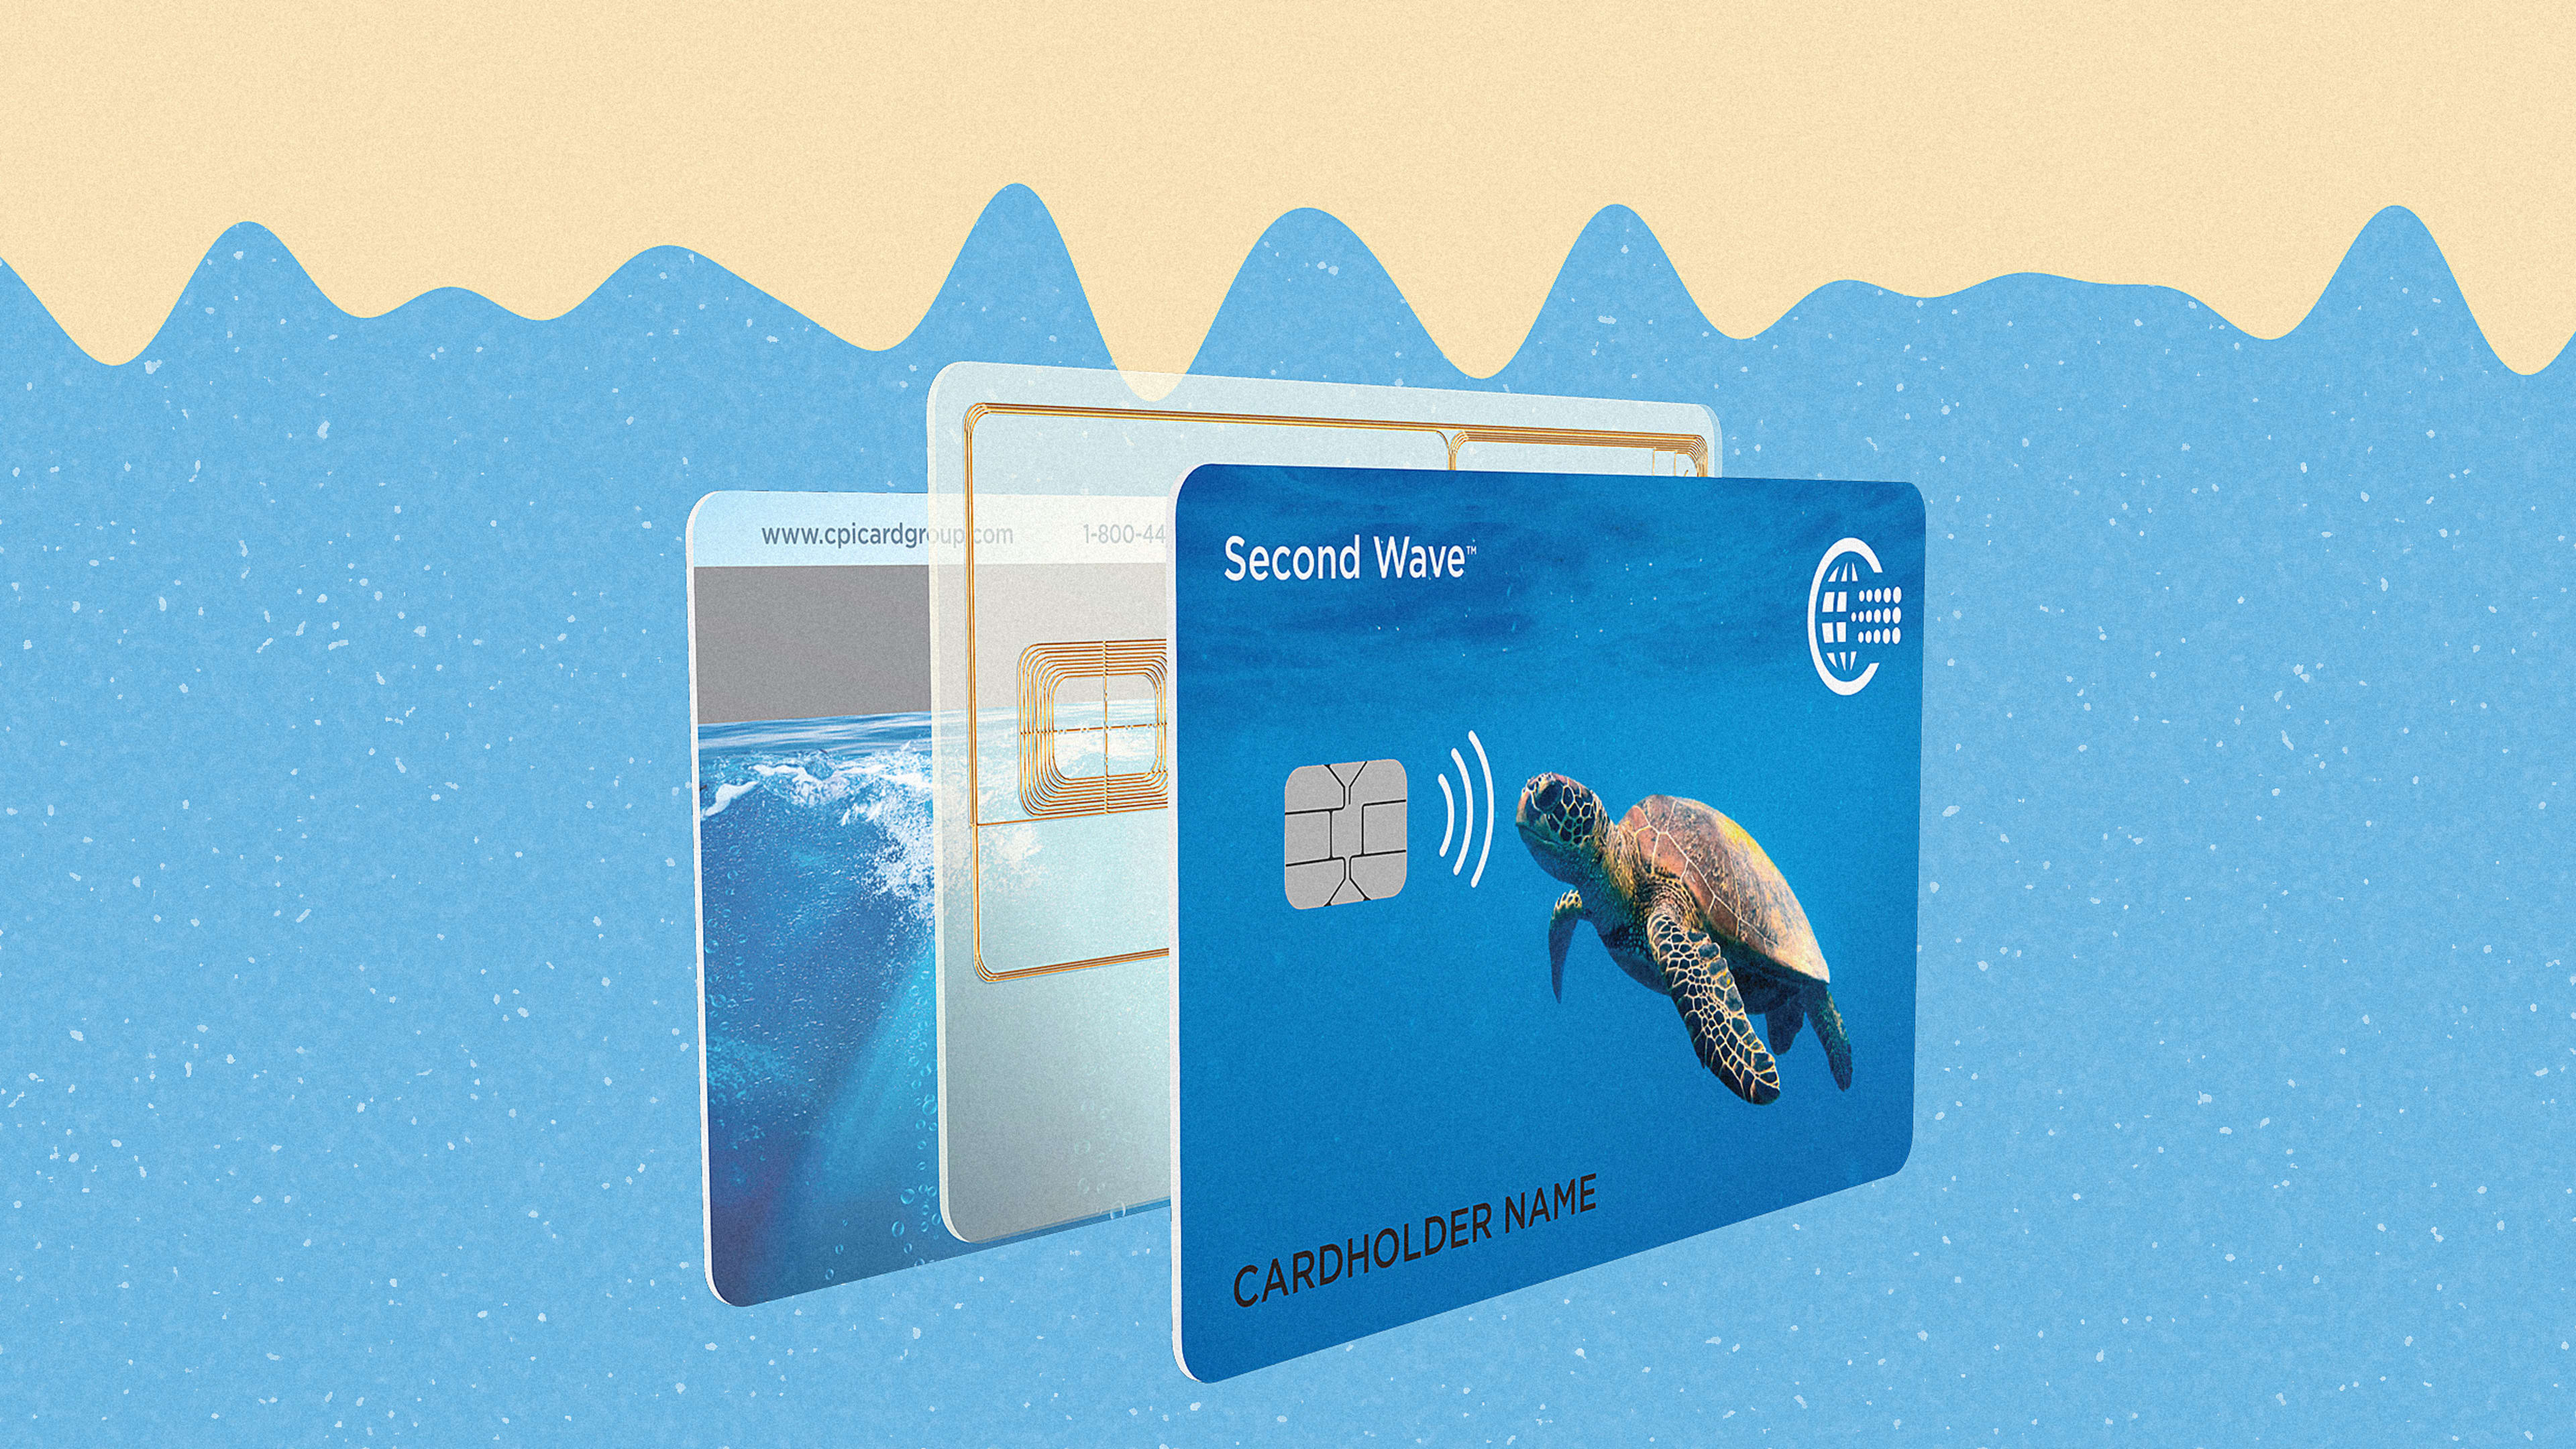 This new credit card is made from plastic that would have ended up in the ocean